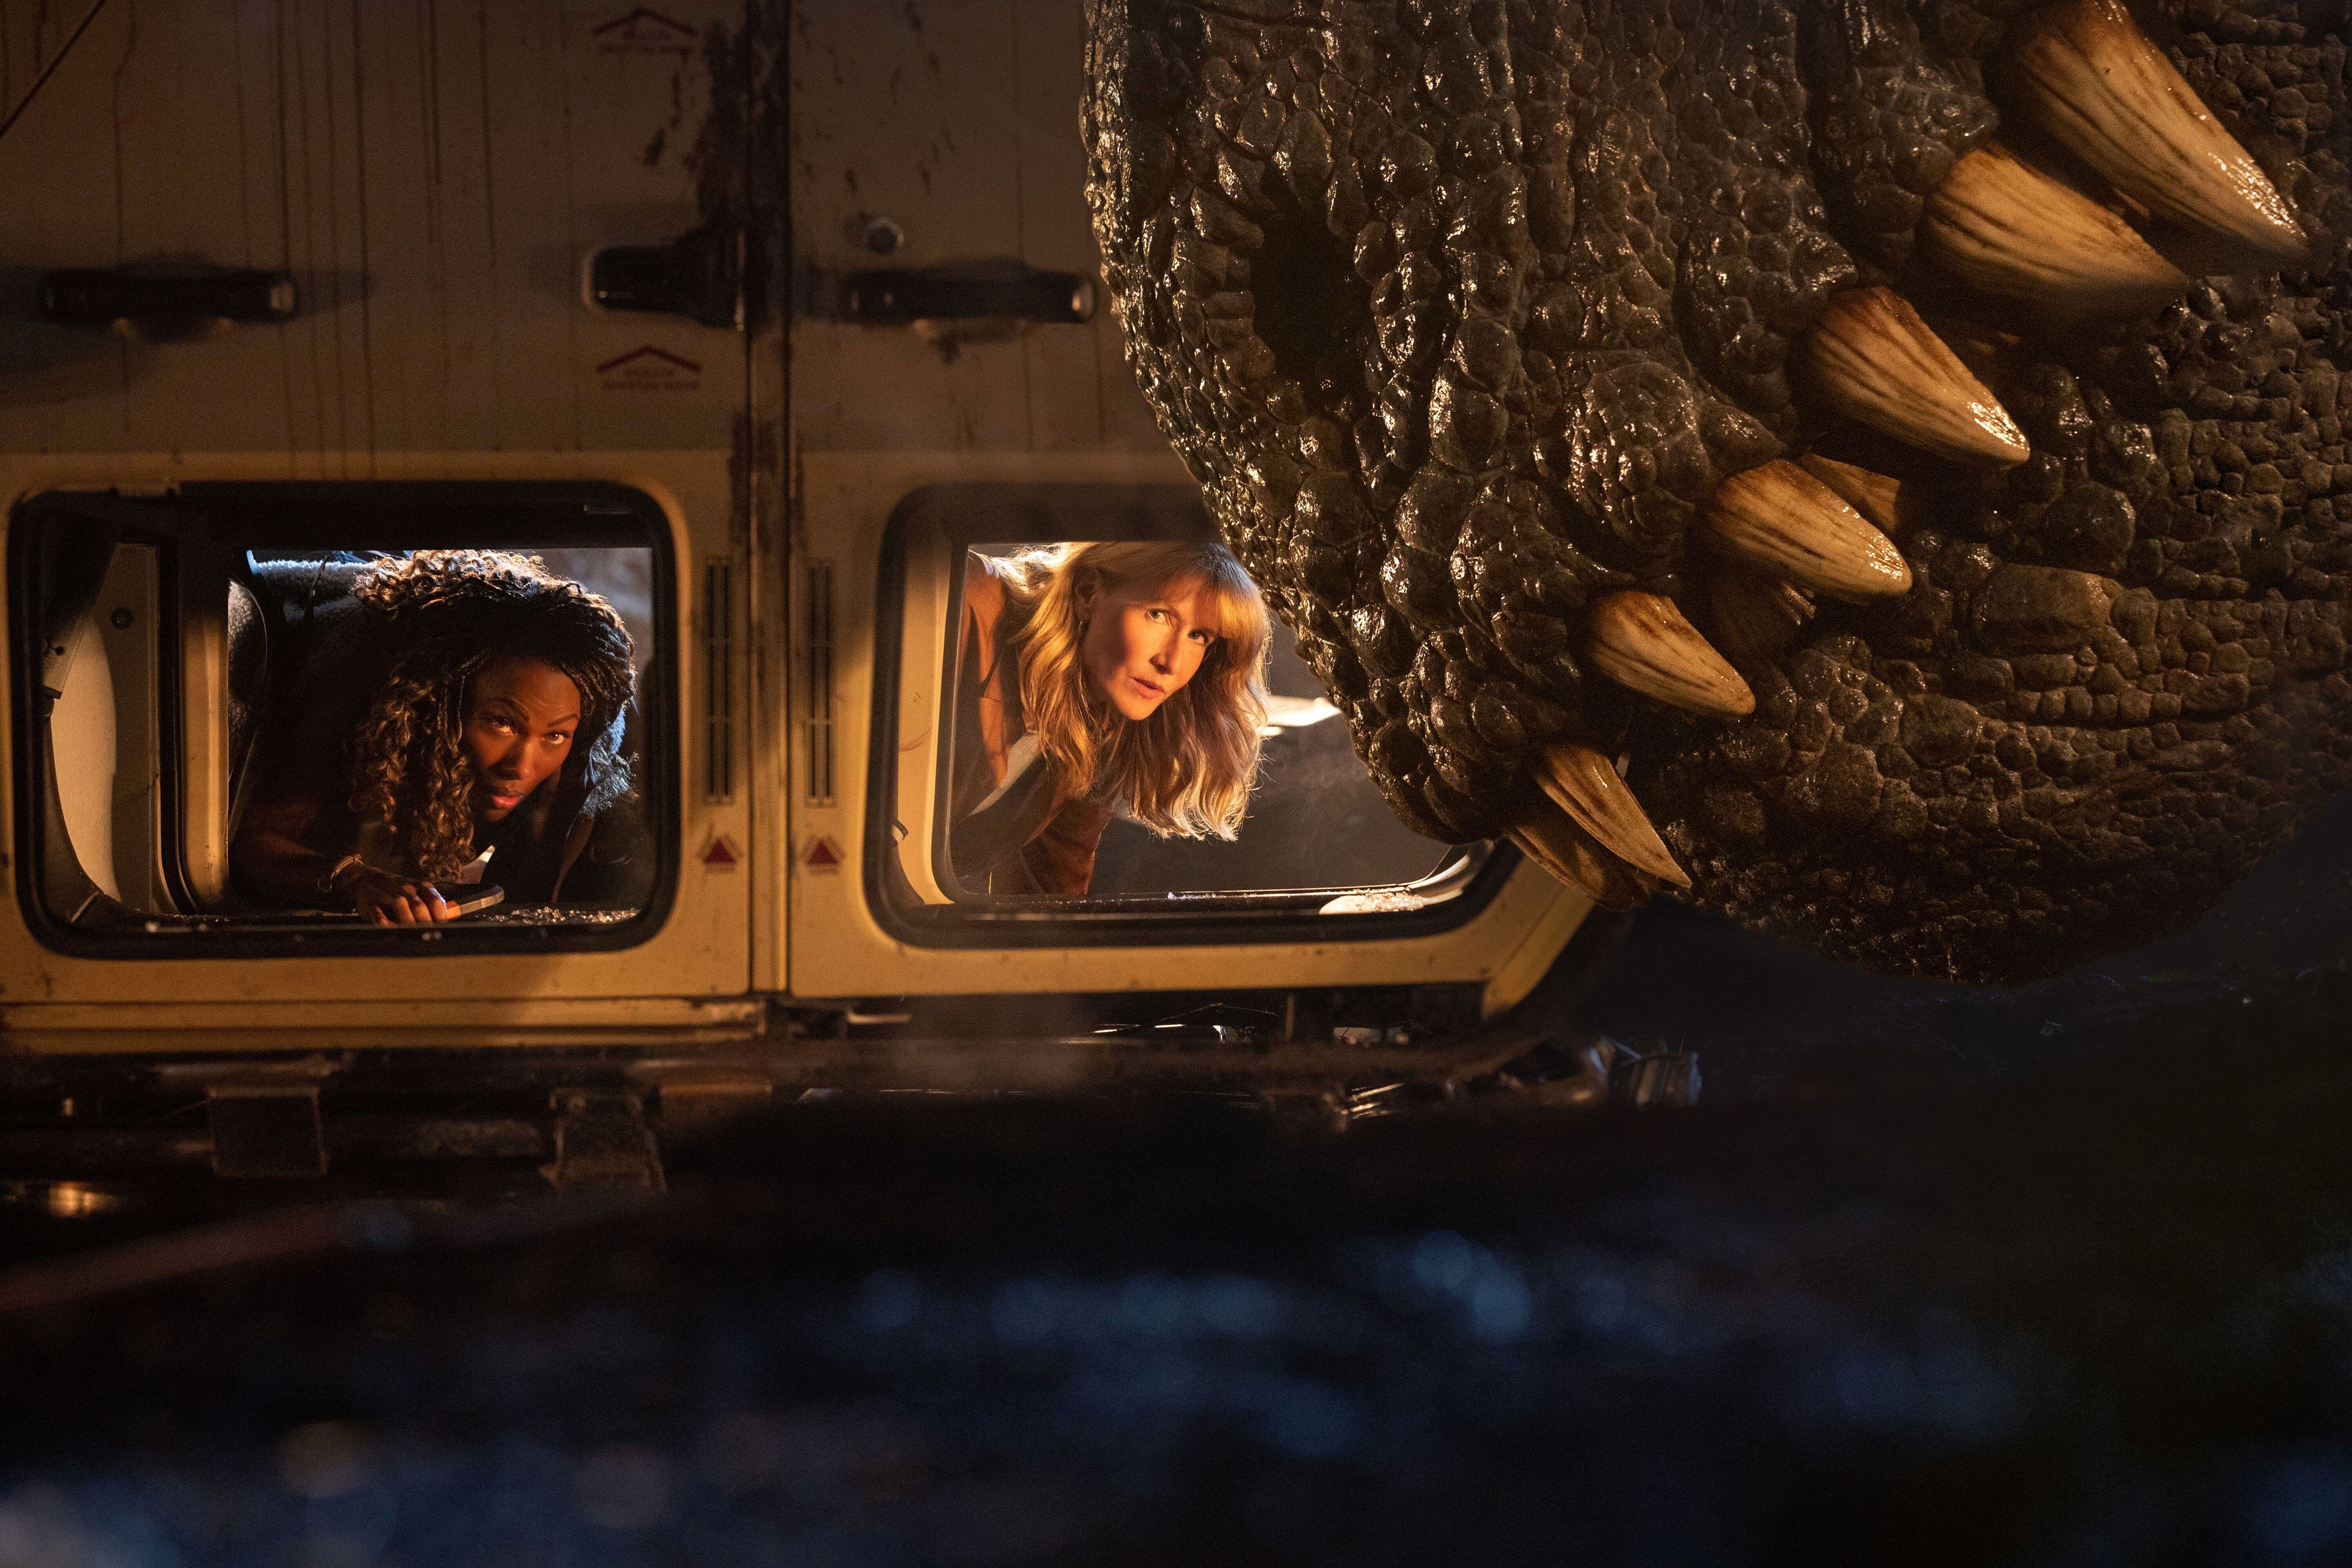 Two women in an overturned vehicle observe a tyrannosaurus rex maw